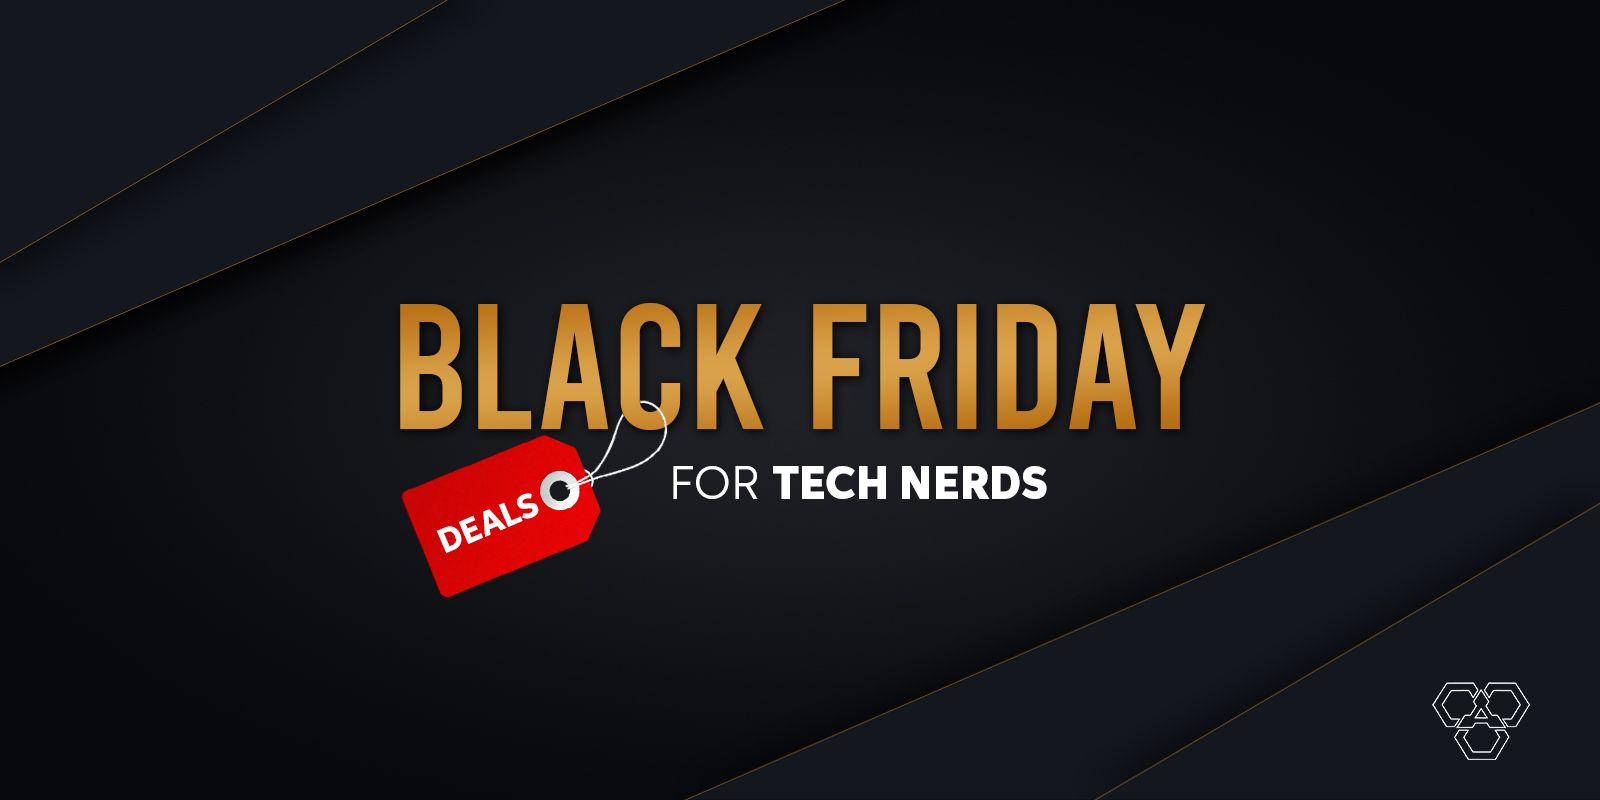 Top Early Black Friday Deals For Tech Nerds